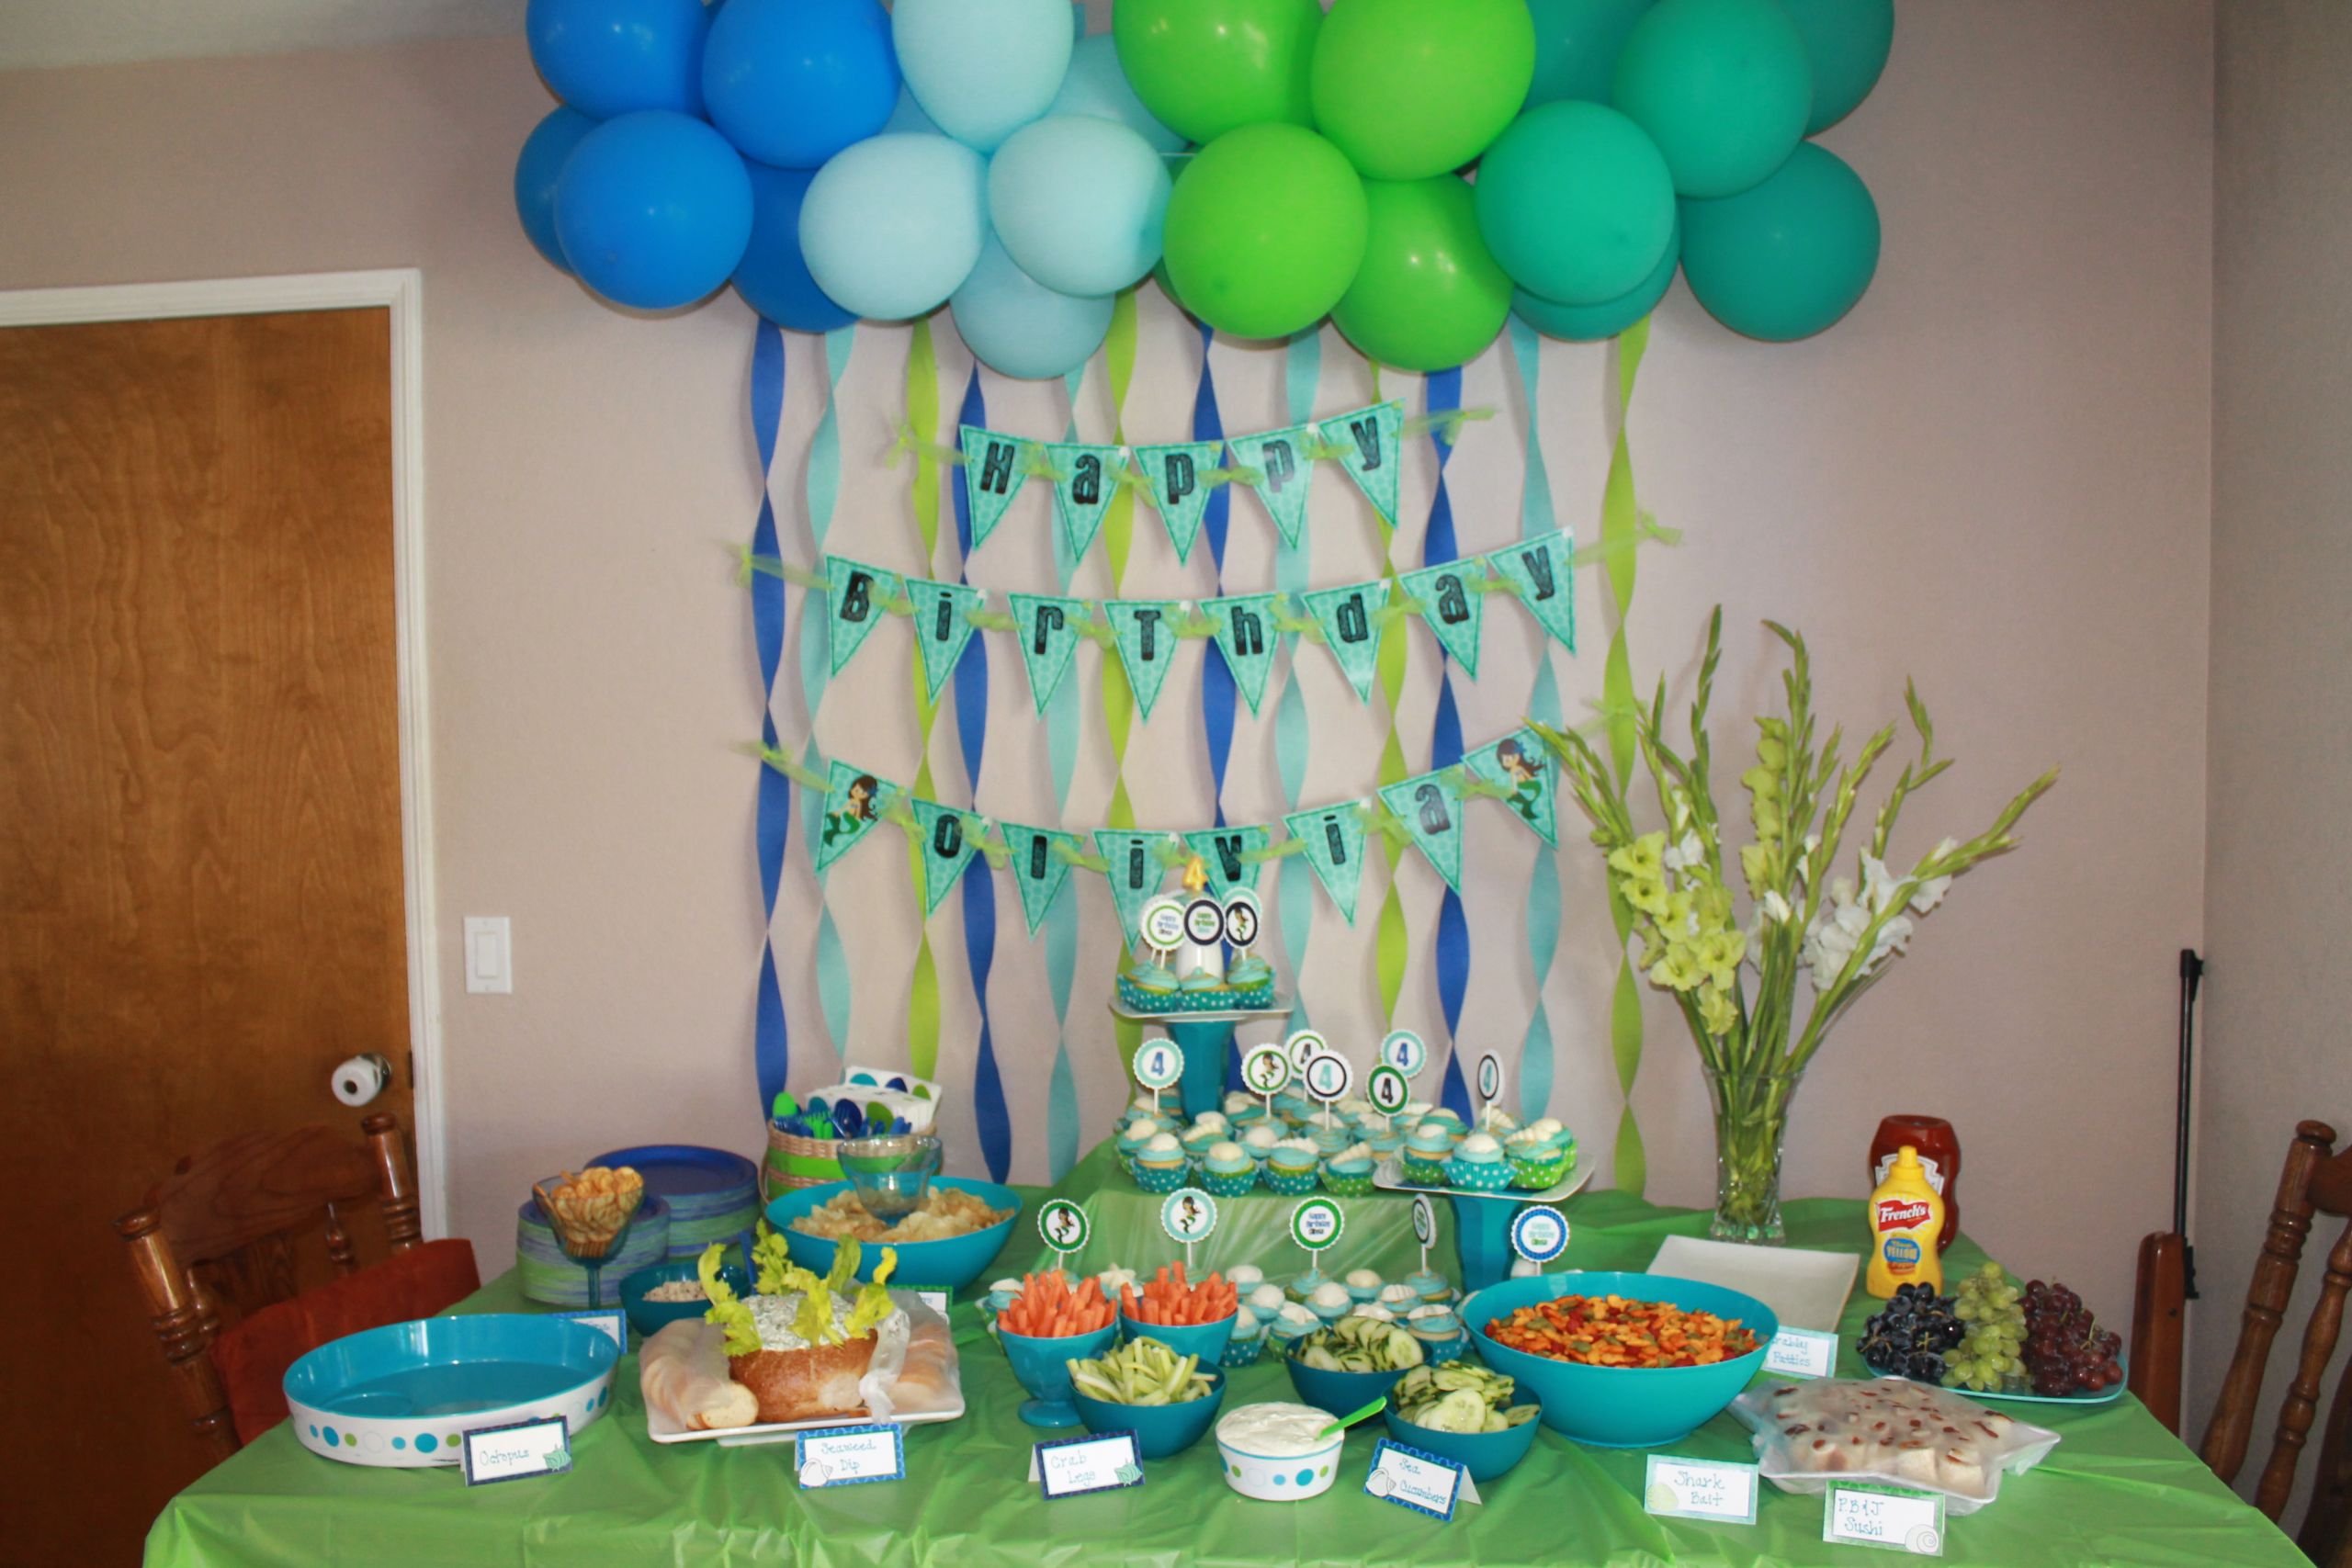 Plan A Birthday Party
 Party Planning Tips for Organizing Children’s Birthday